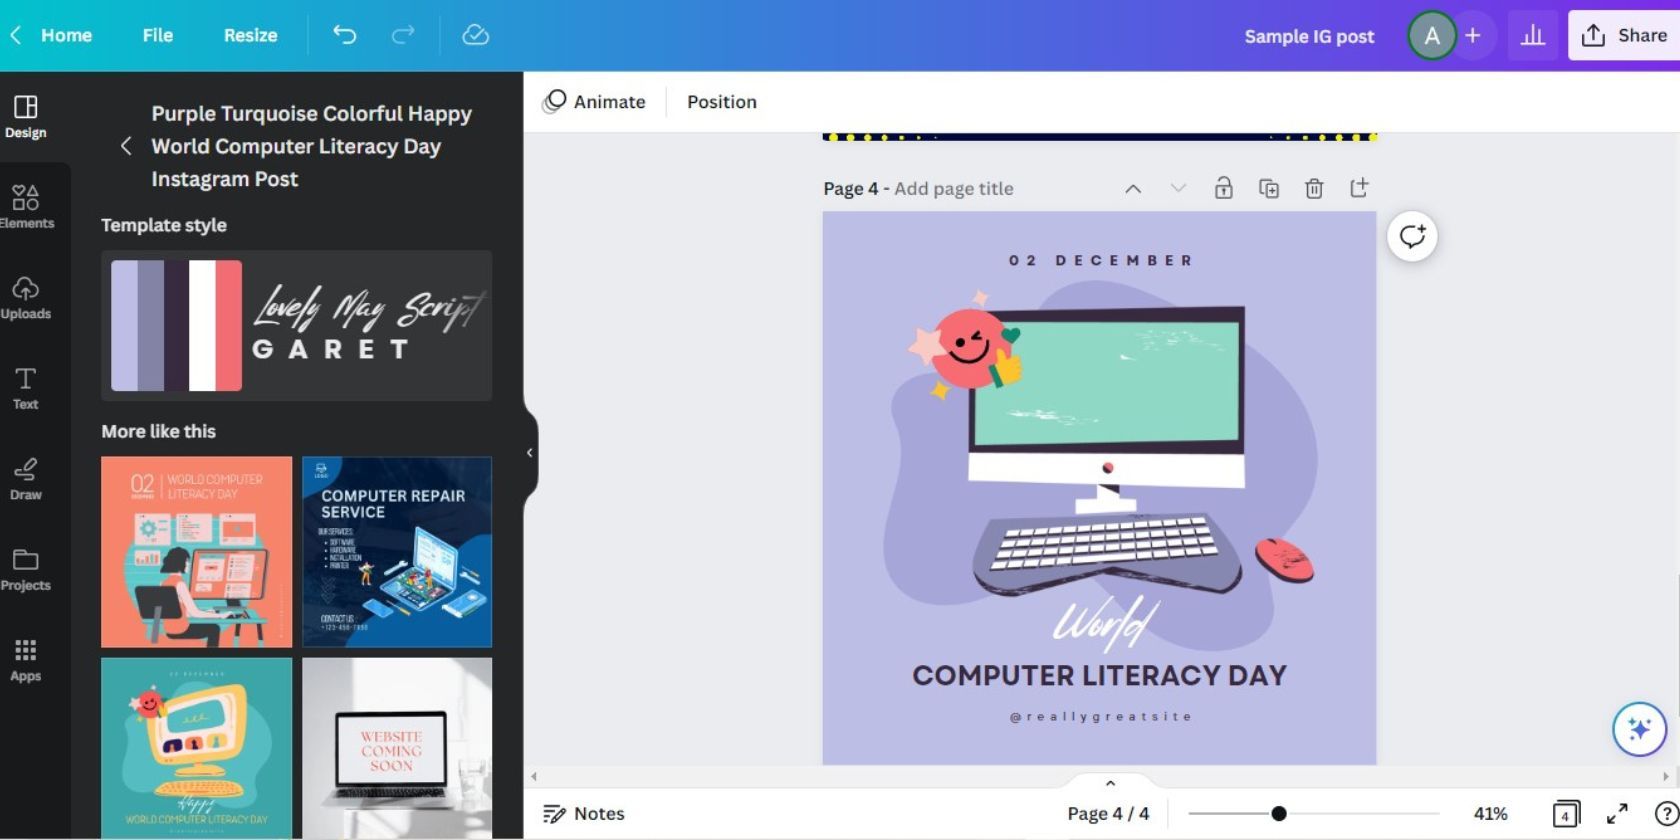 Sample Canva Instagram Design for Computer Literacy Day